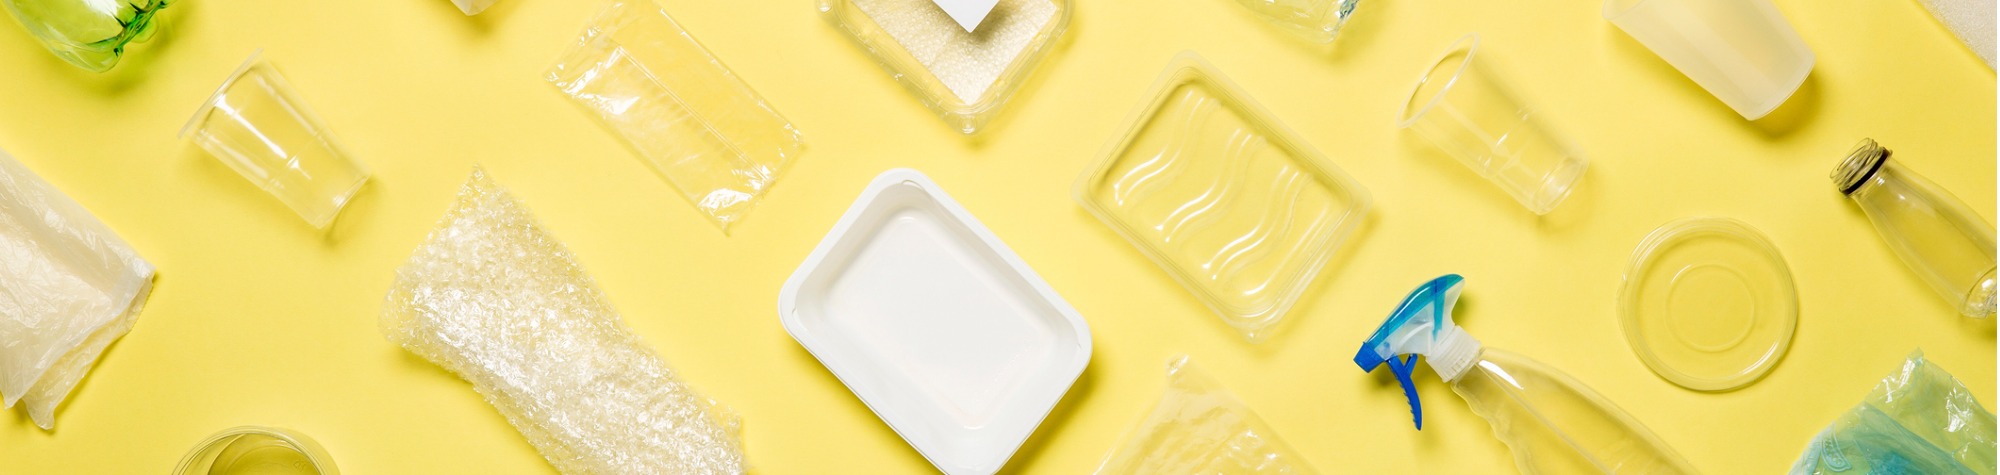 Introduction of Plastic Packaging Tax from April 2022